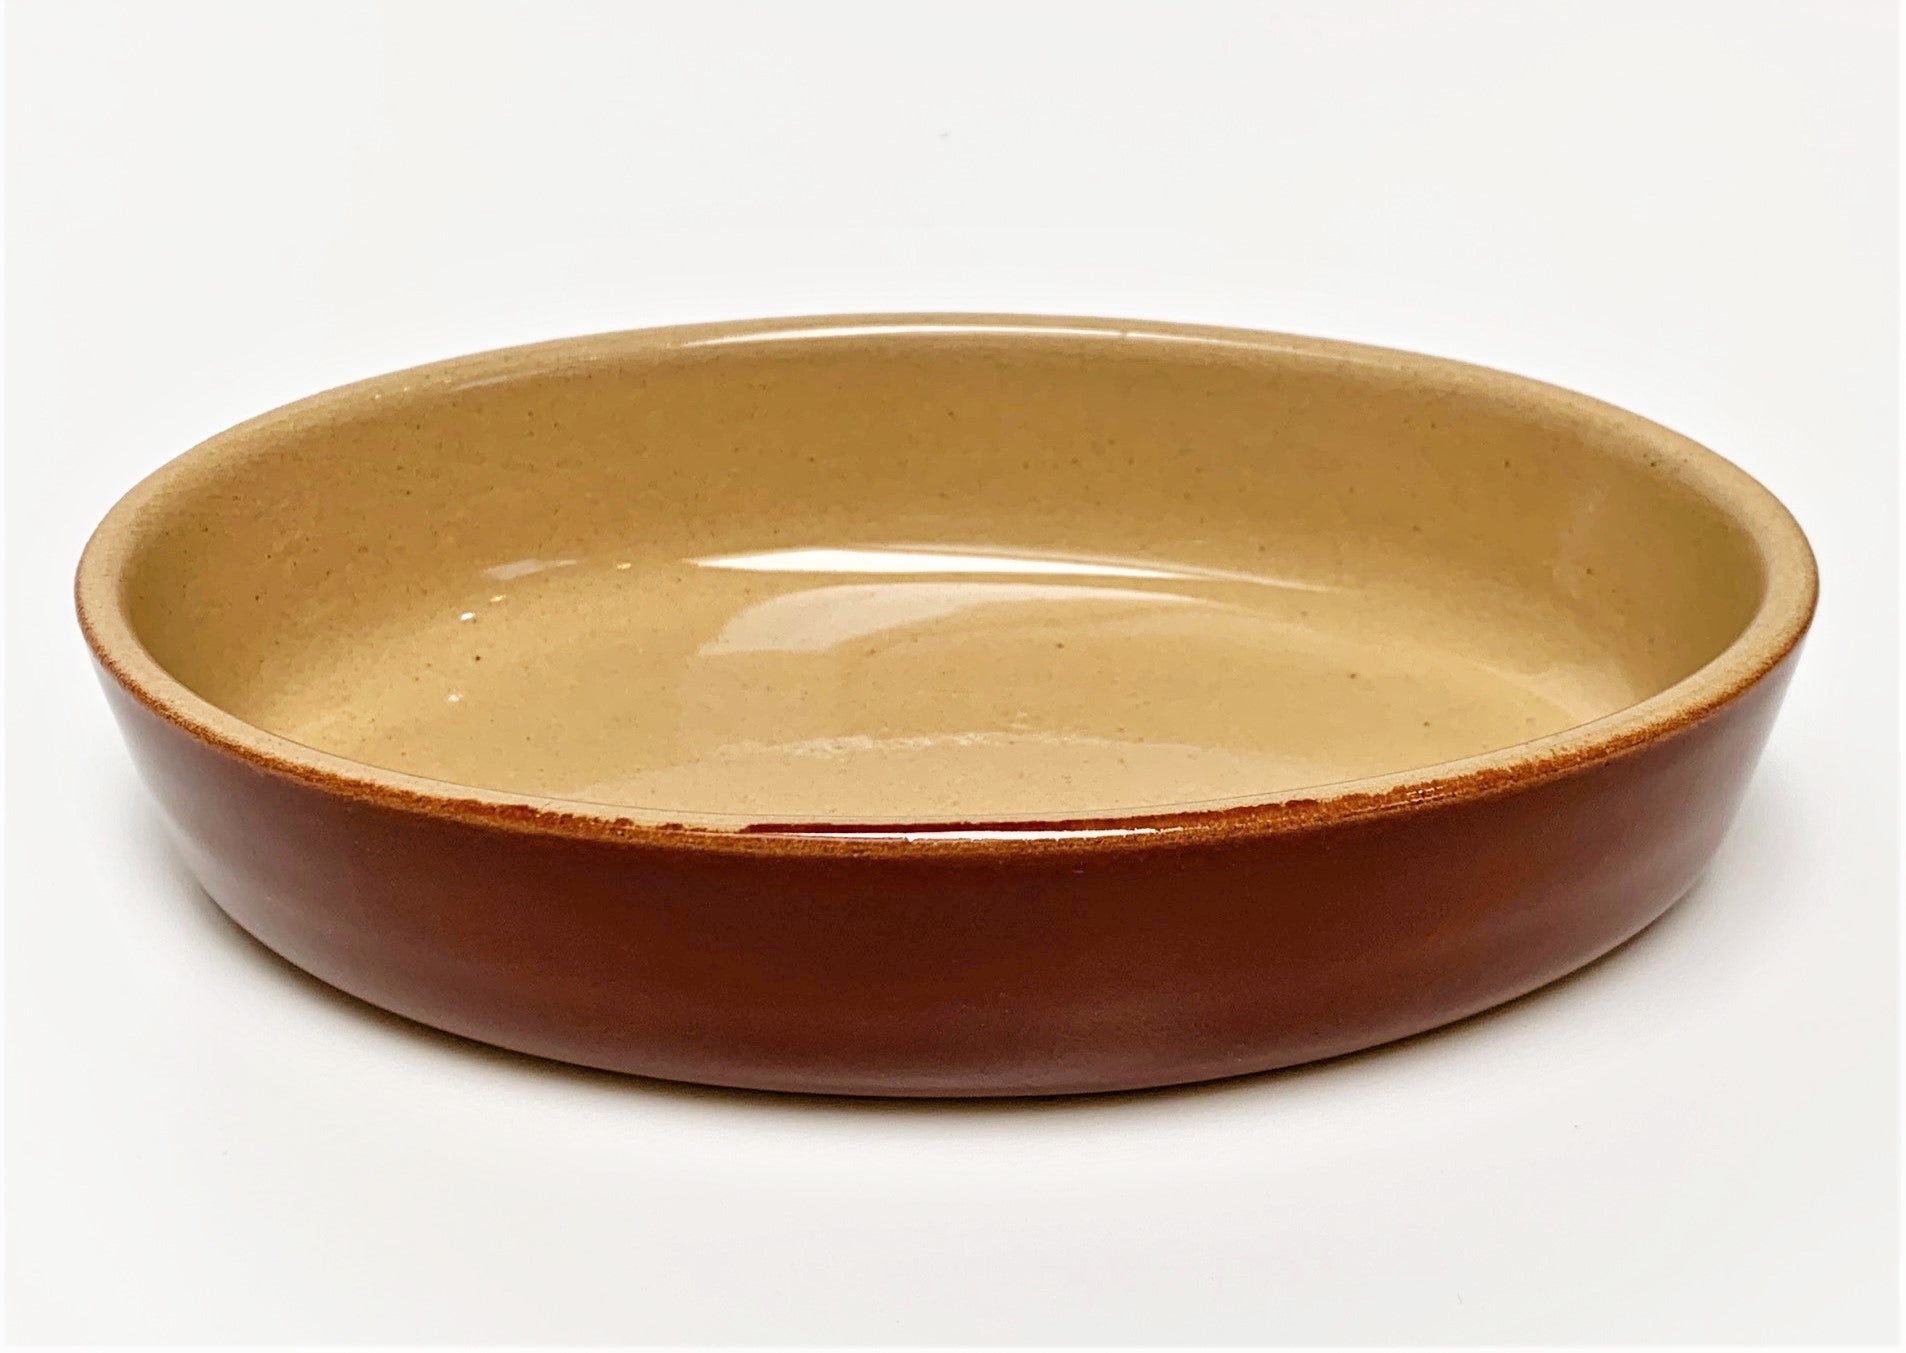 Poterie Renault Oval Dish - Small (.25L) Brown Ceramic Poterie Renault Brand_Poterie Renault Dinnerware_Bowls & Plates Home_Decor Kitchen_Dinnerware New Arrivals Poterie Renault Pc81b0.25L2